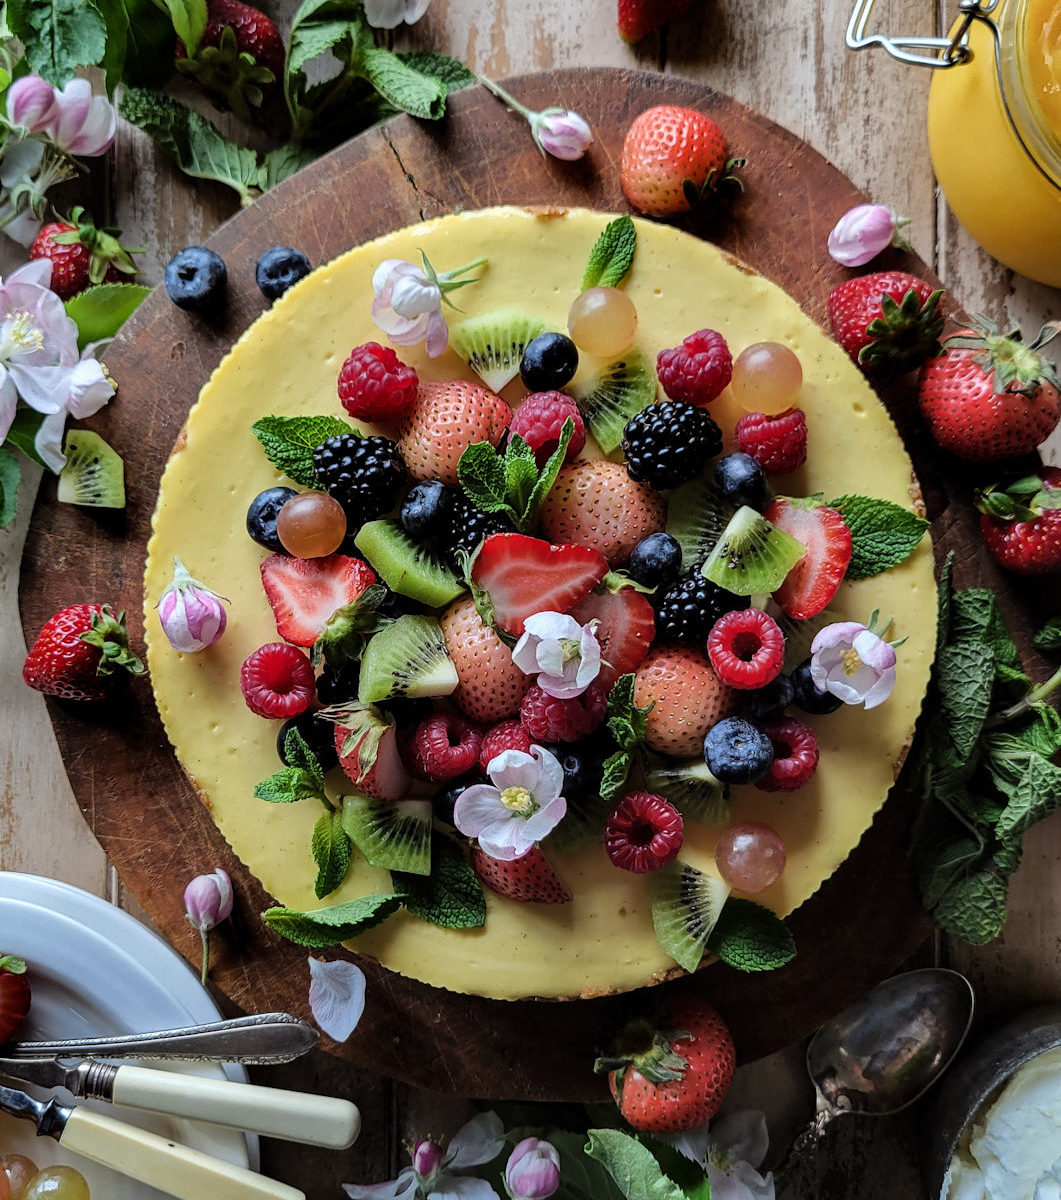 lemon cheesecake topped with fresh berries, mint leaves and apple blossoms, surrounded by more apple blossoms and lemon curd